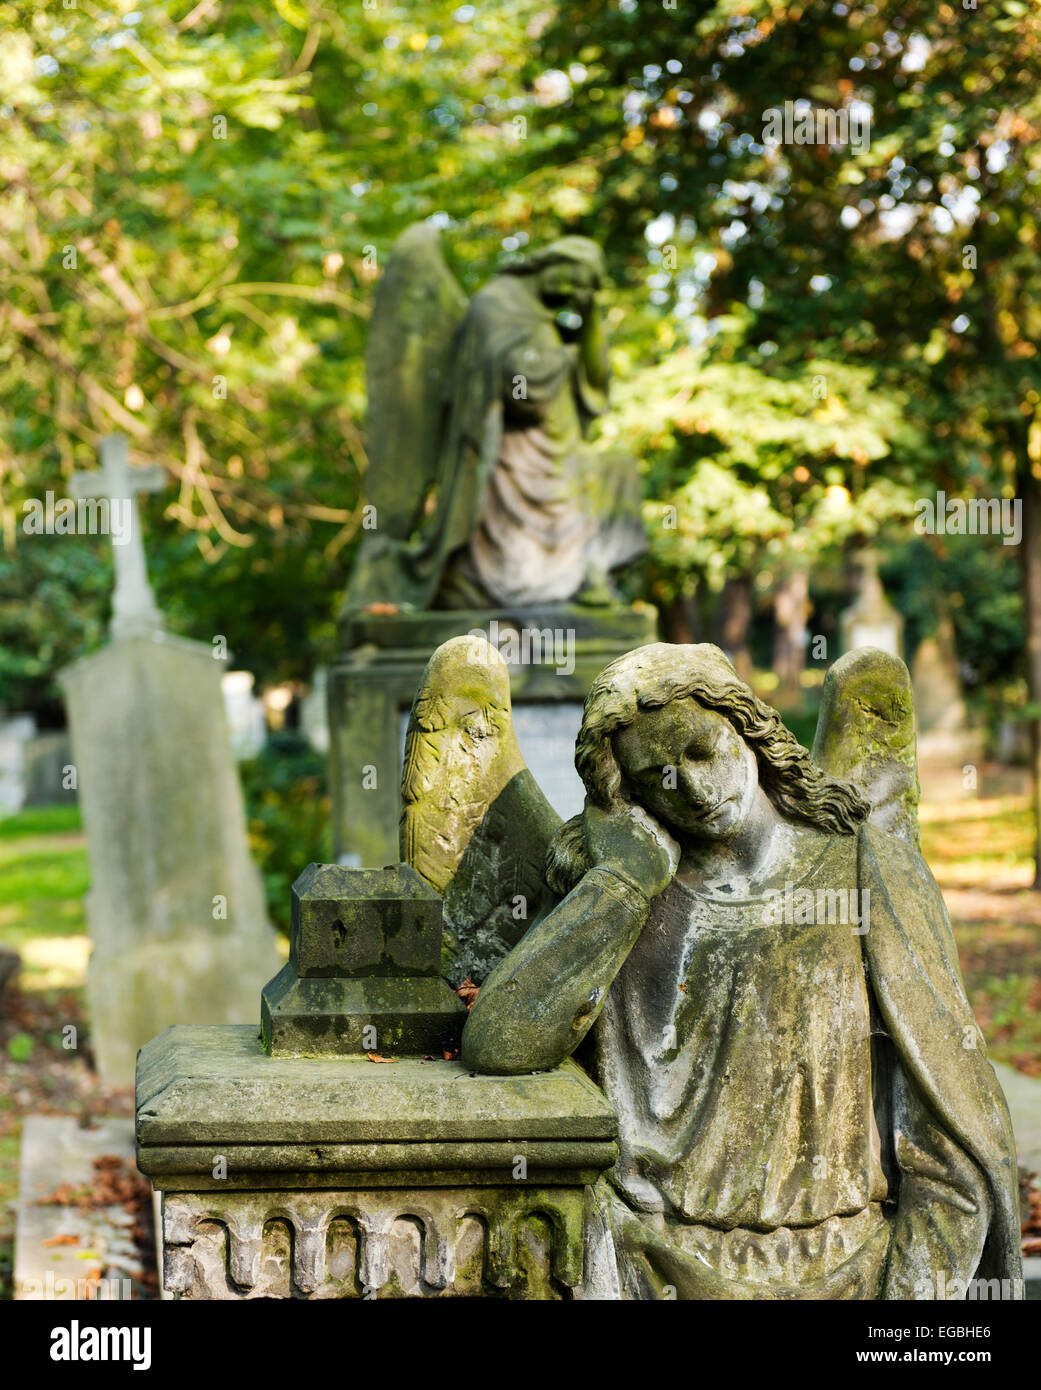 Angels guard grave sites in the Olsany Cemetery. Stock Photo